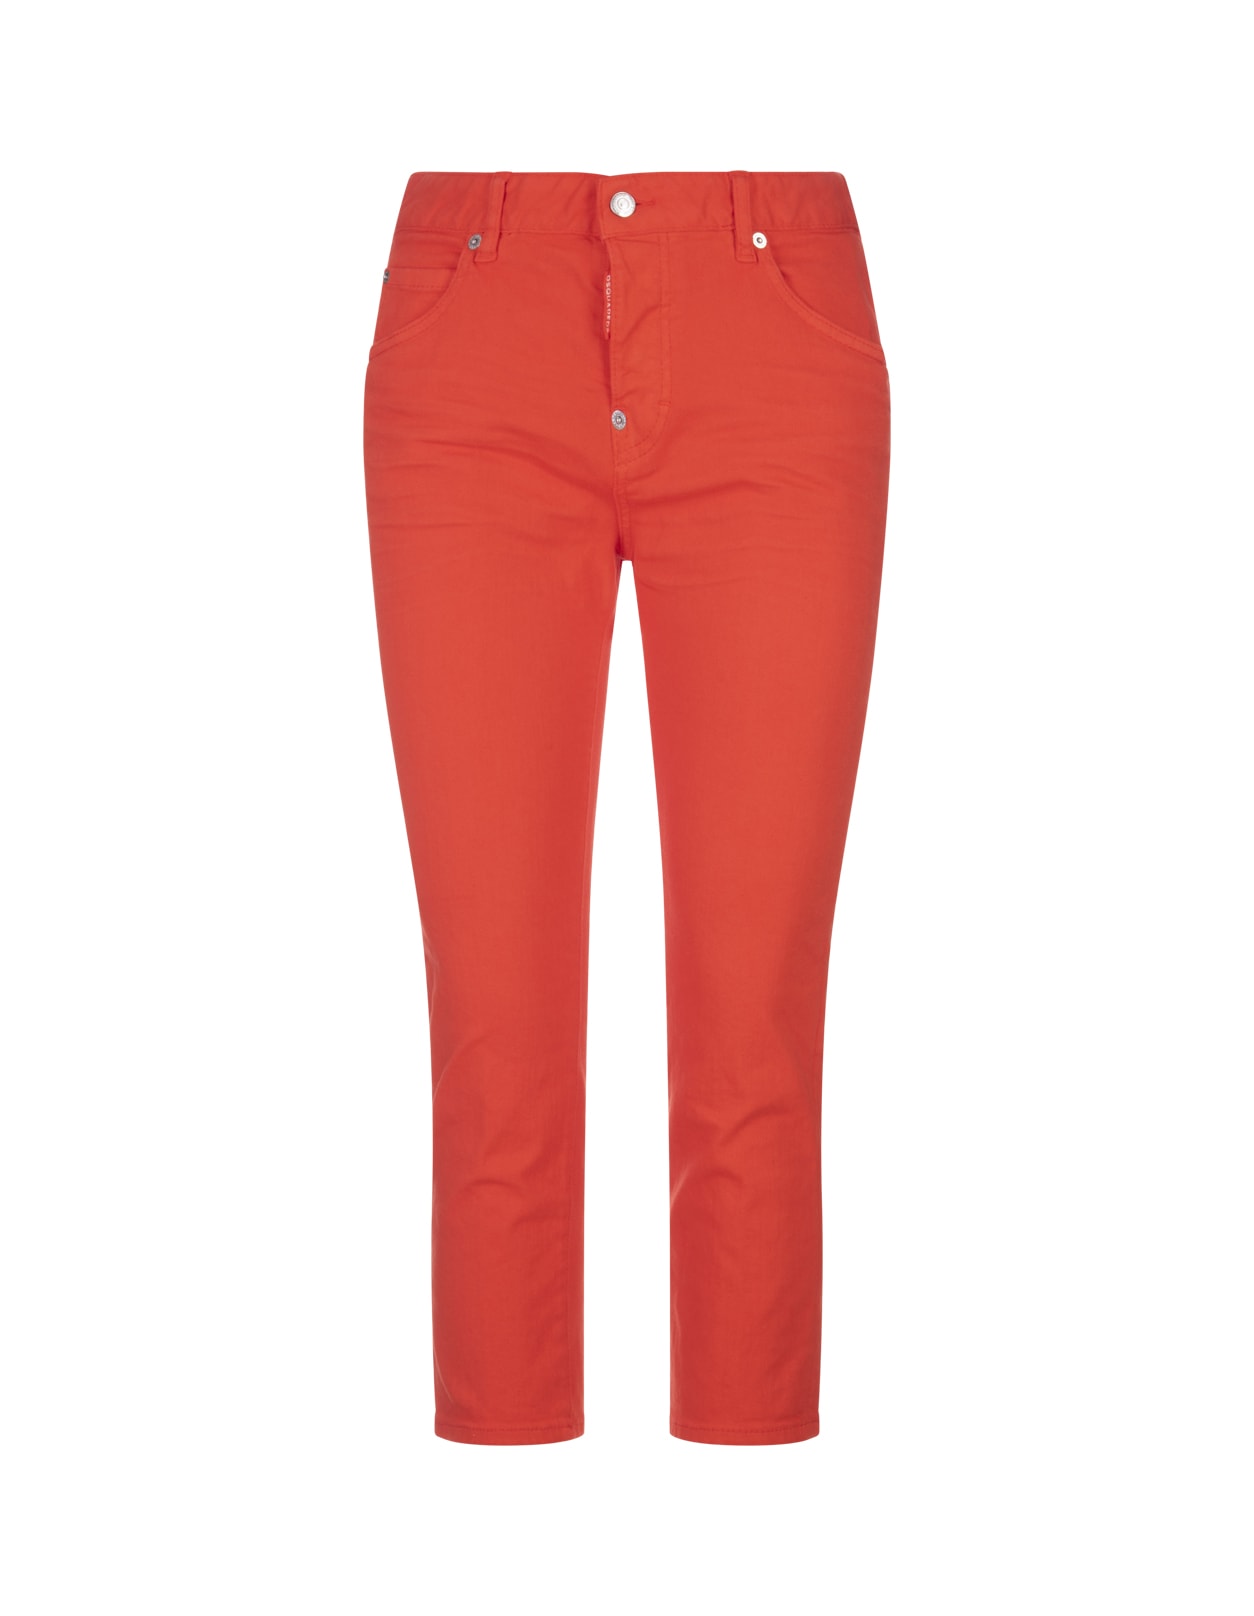 Dsquared2 Woman Orange Cropped Dyed Cool Girl Jeans